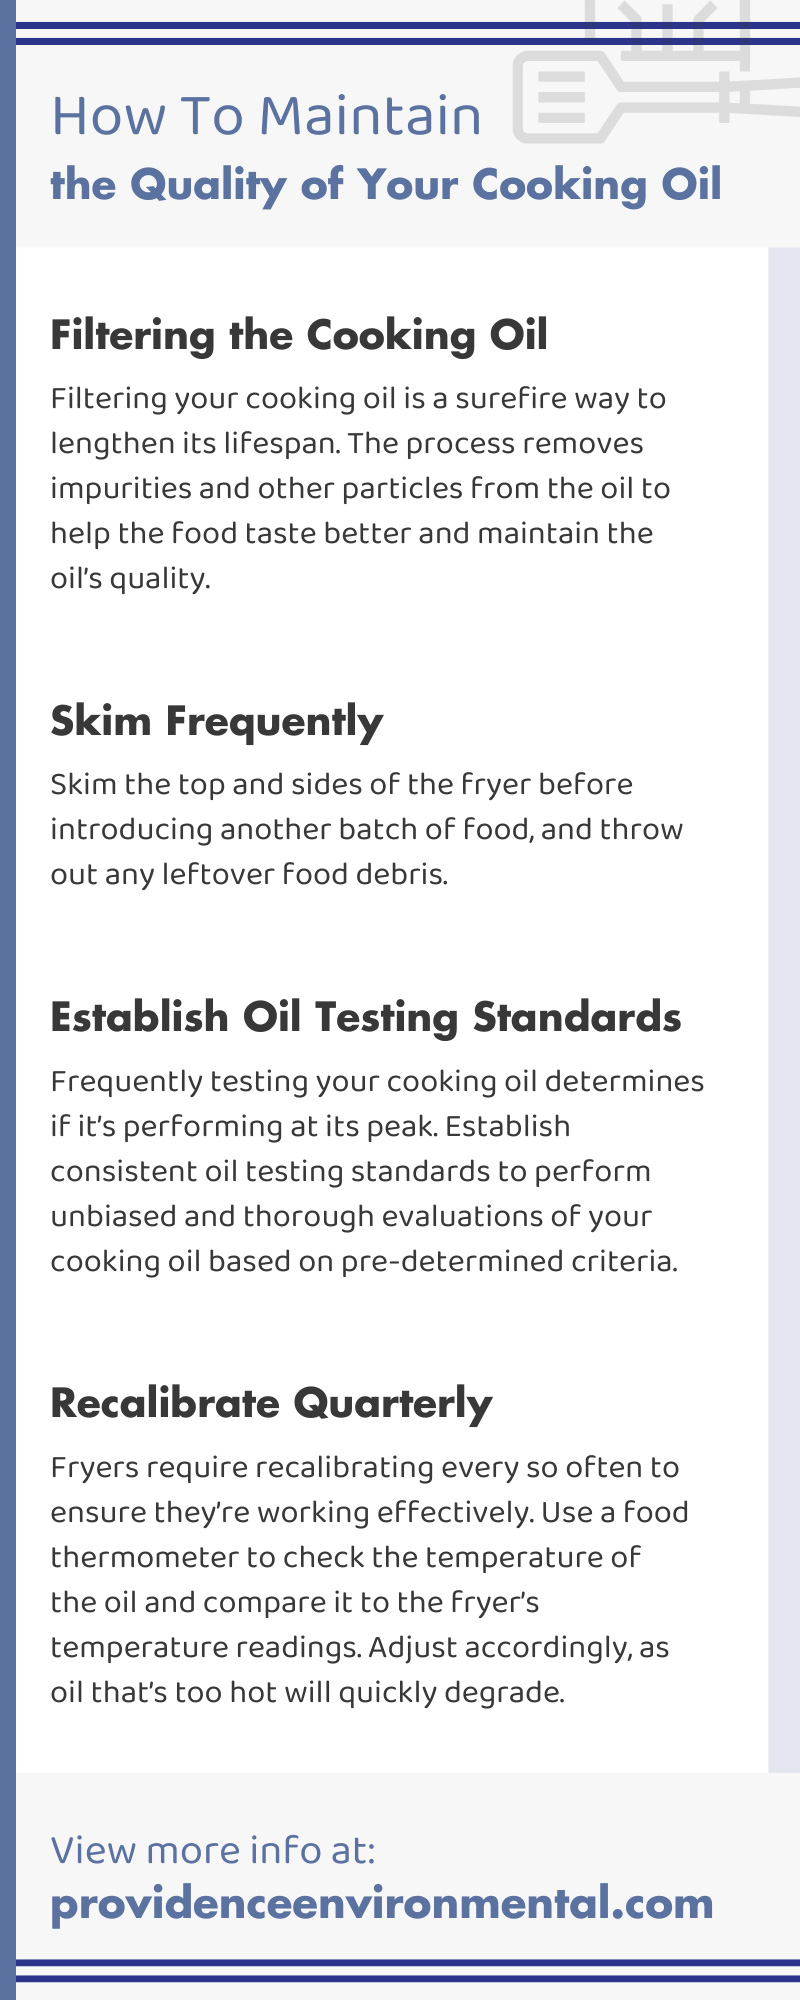 How To Maintain the Quality of Your Cooking Oil